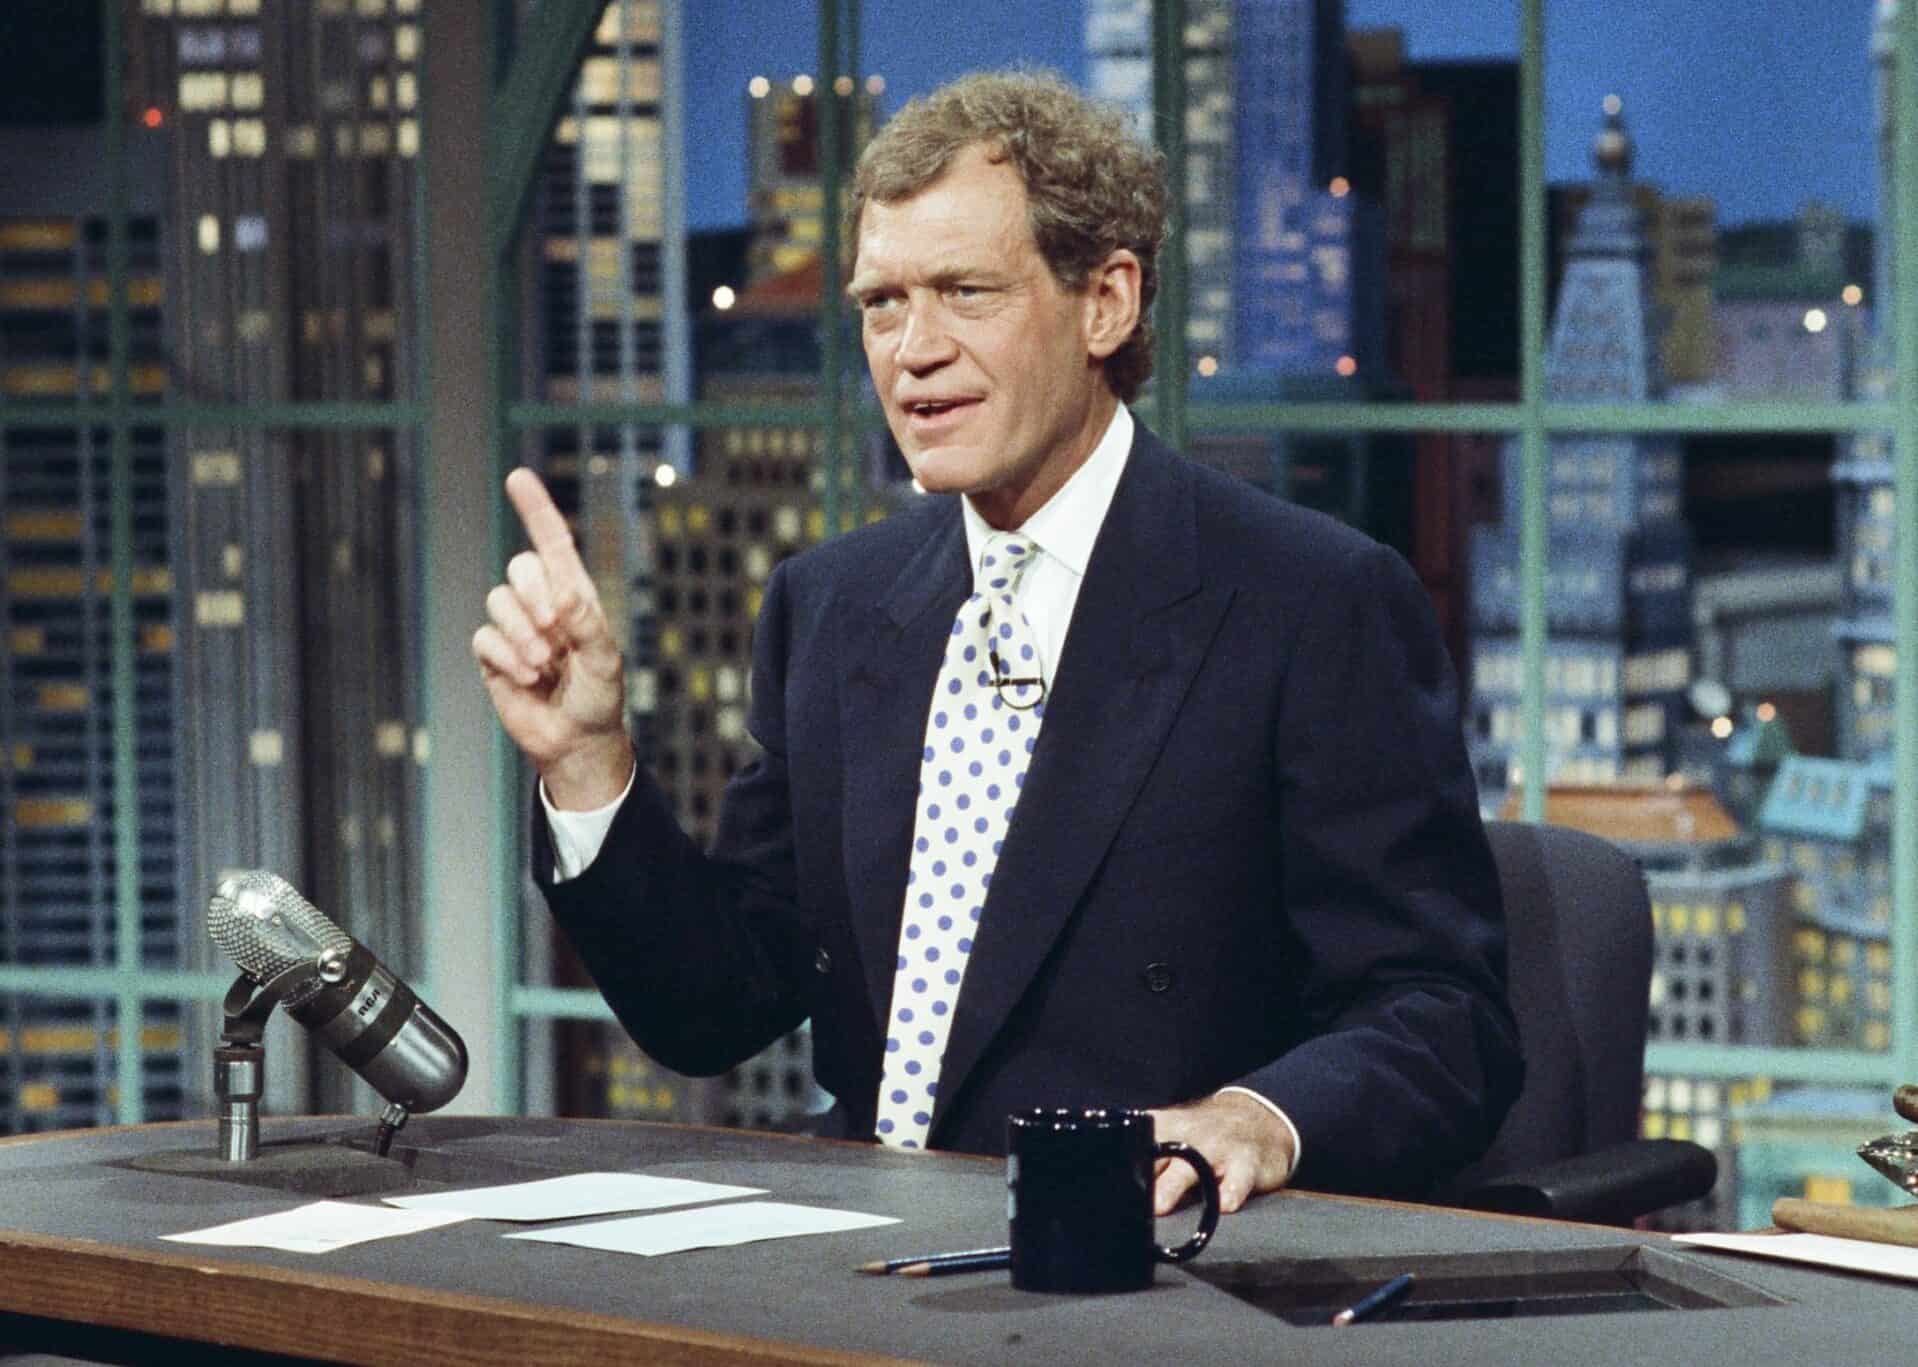 "Late Night with David Letterman" first aired on February 1, 1982